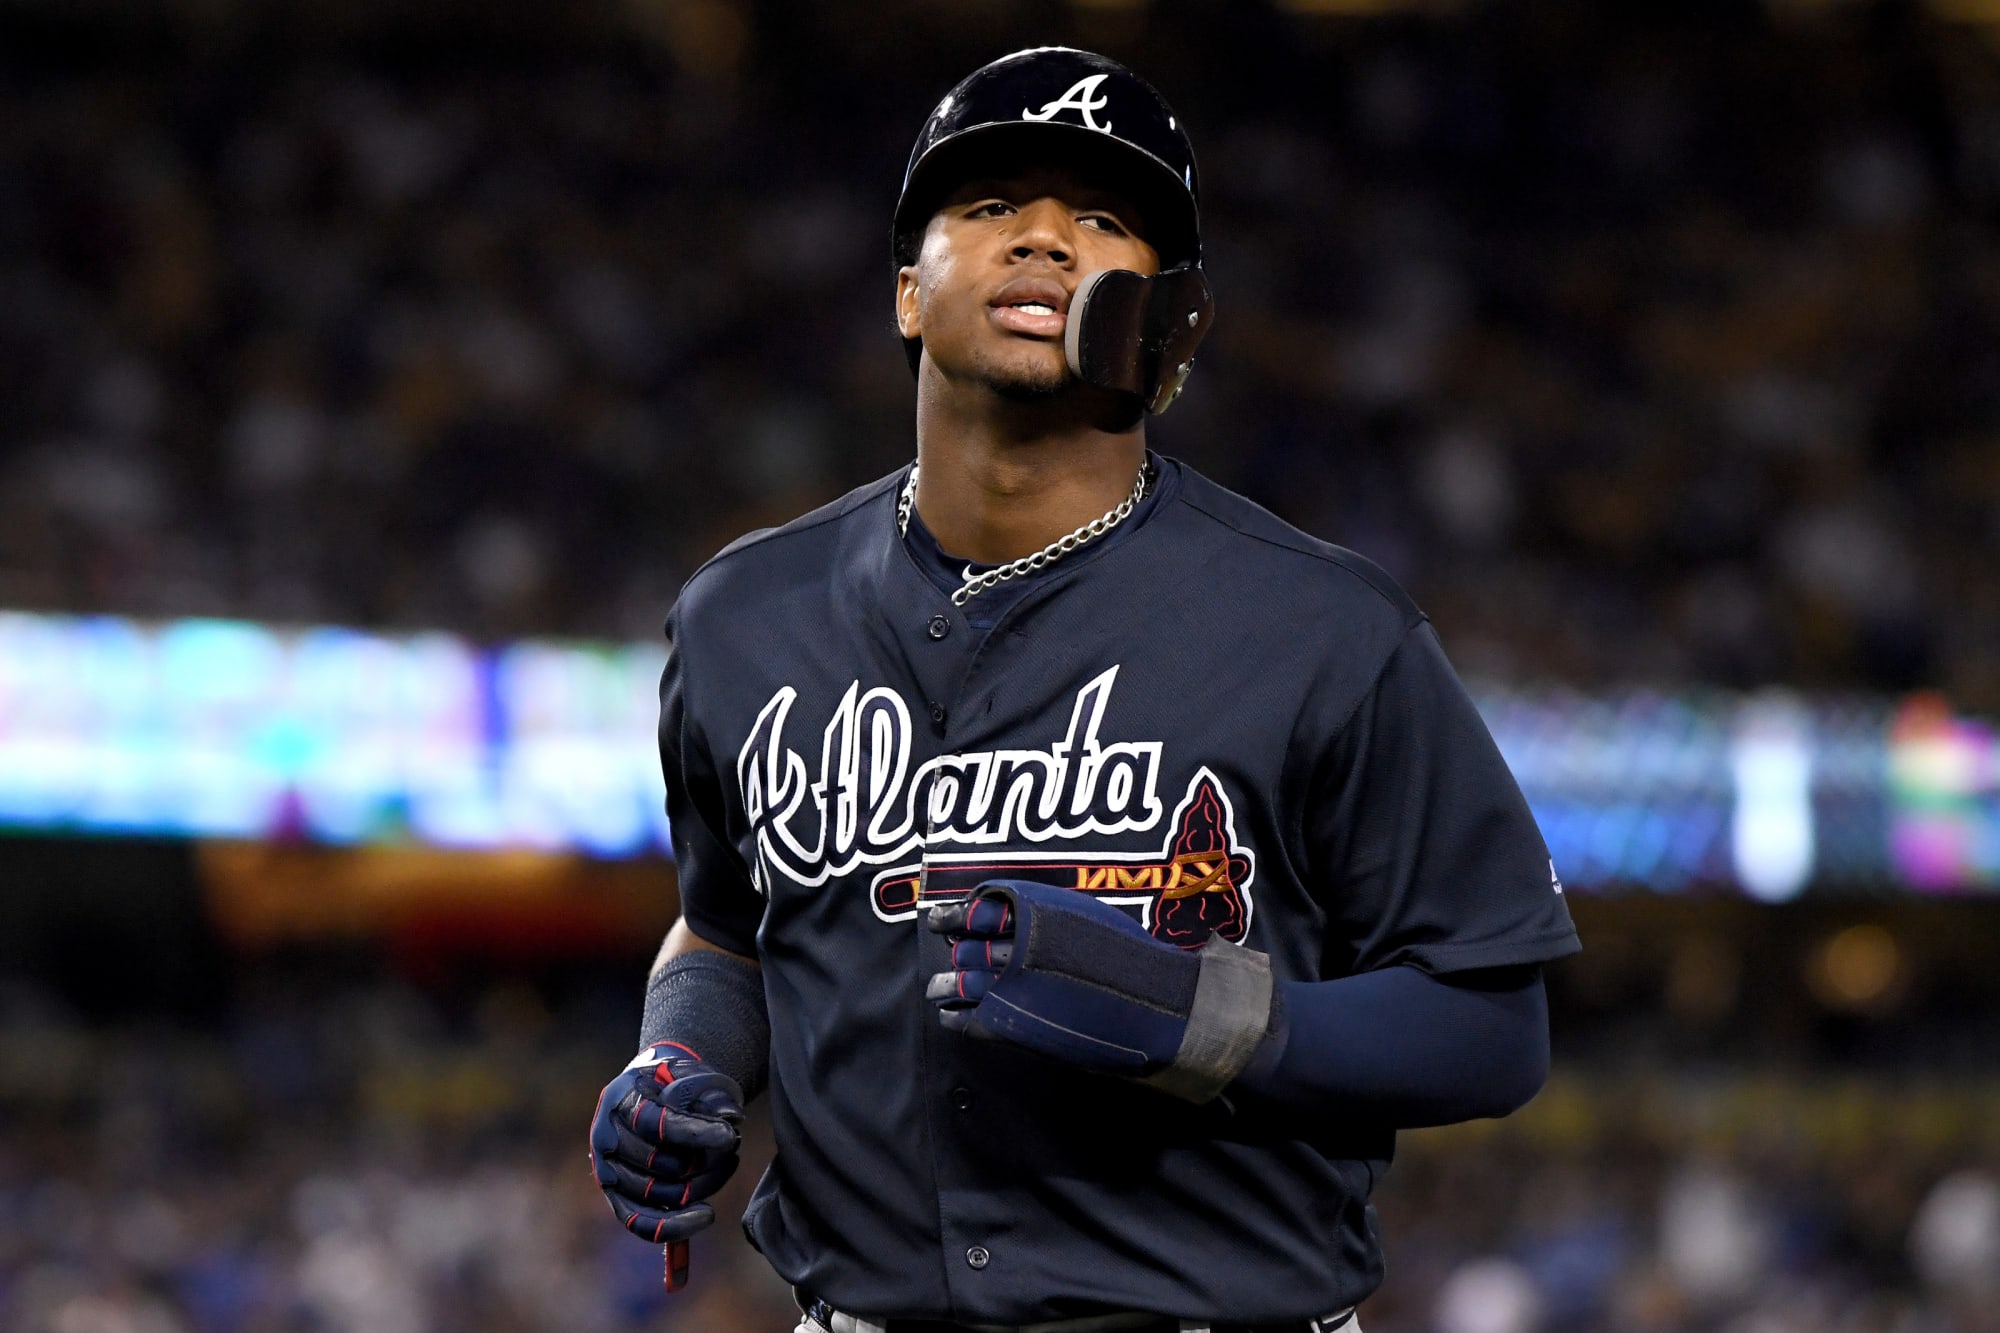 Ronald Acuna Jr. Didn't Win But He Made His Mark On Home Run Derby